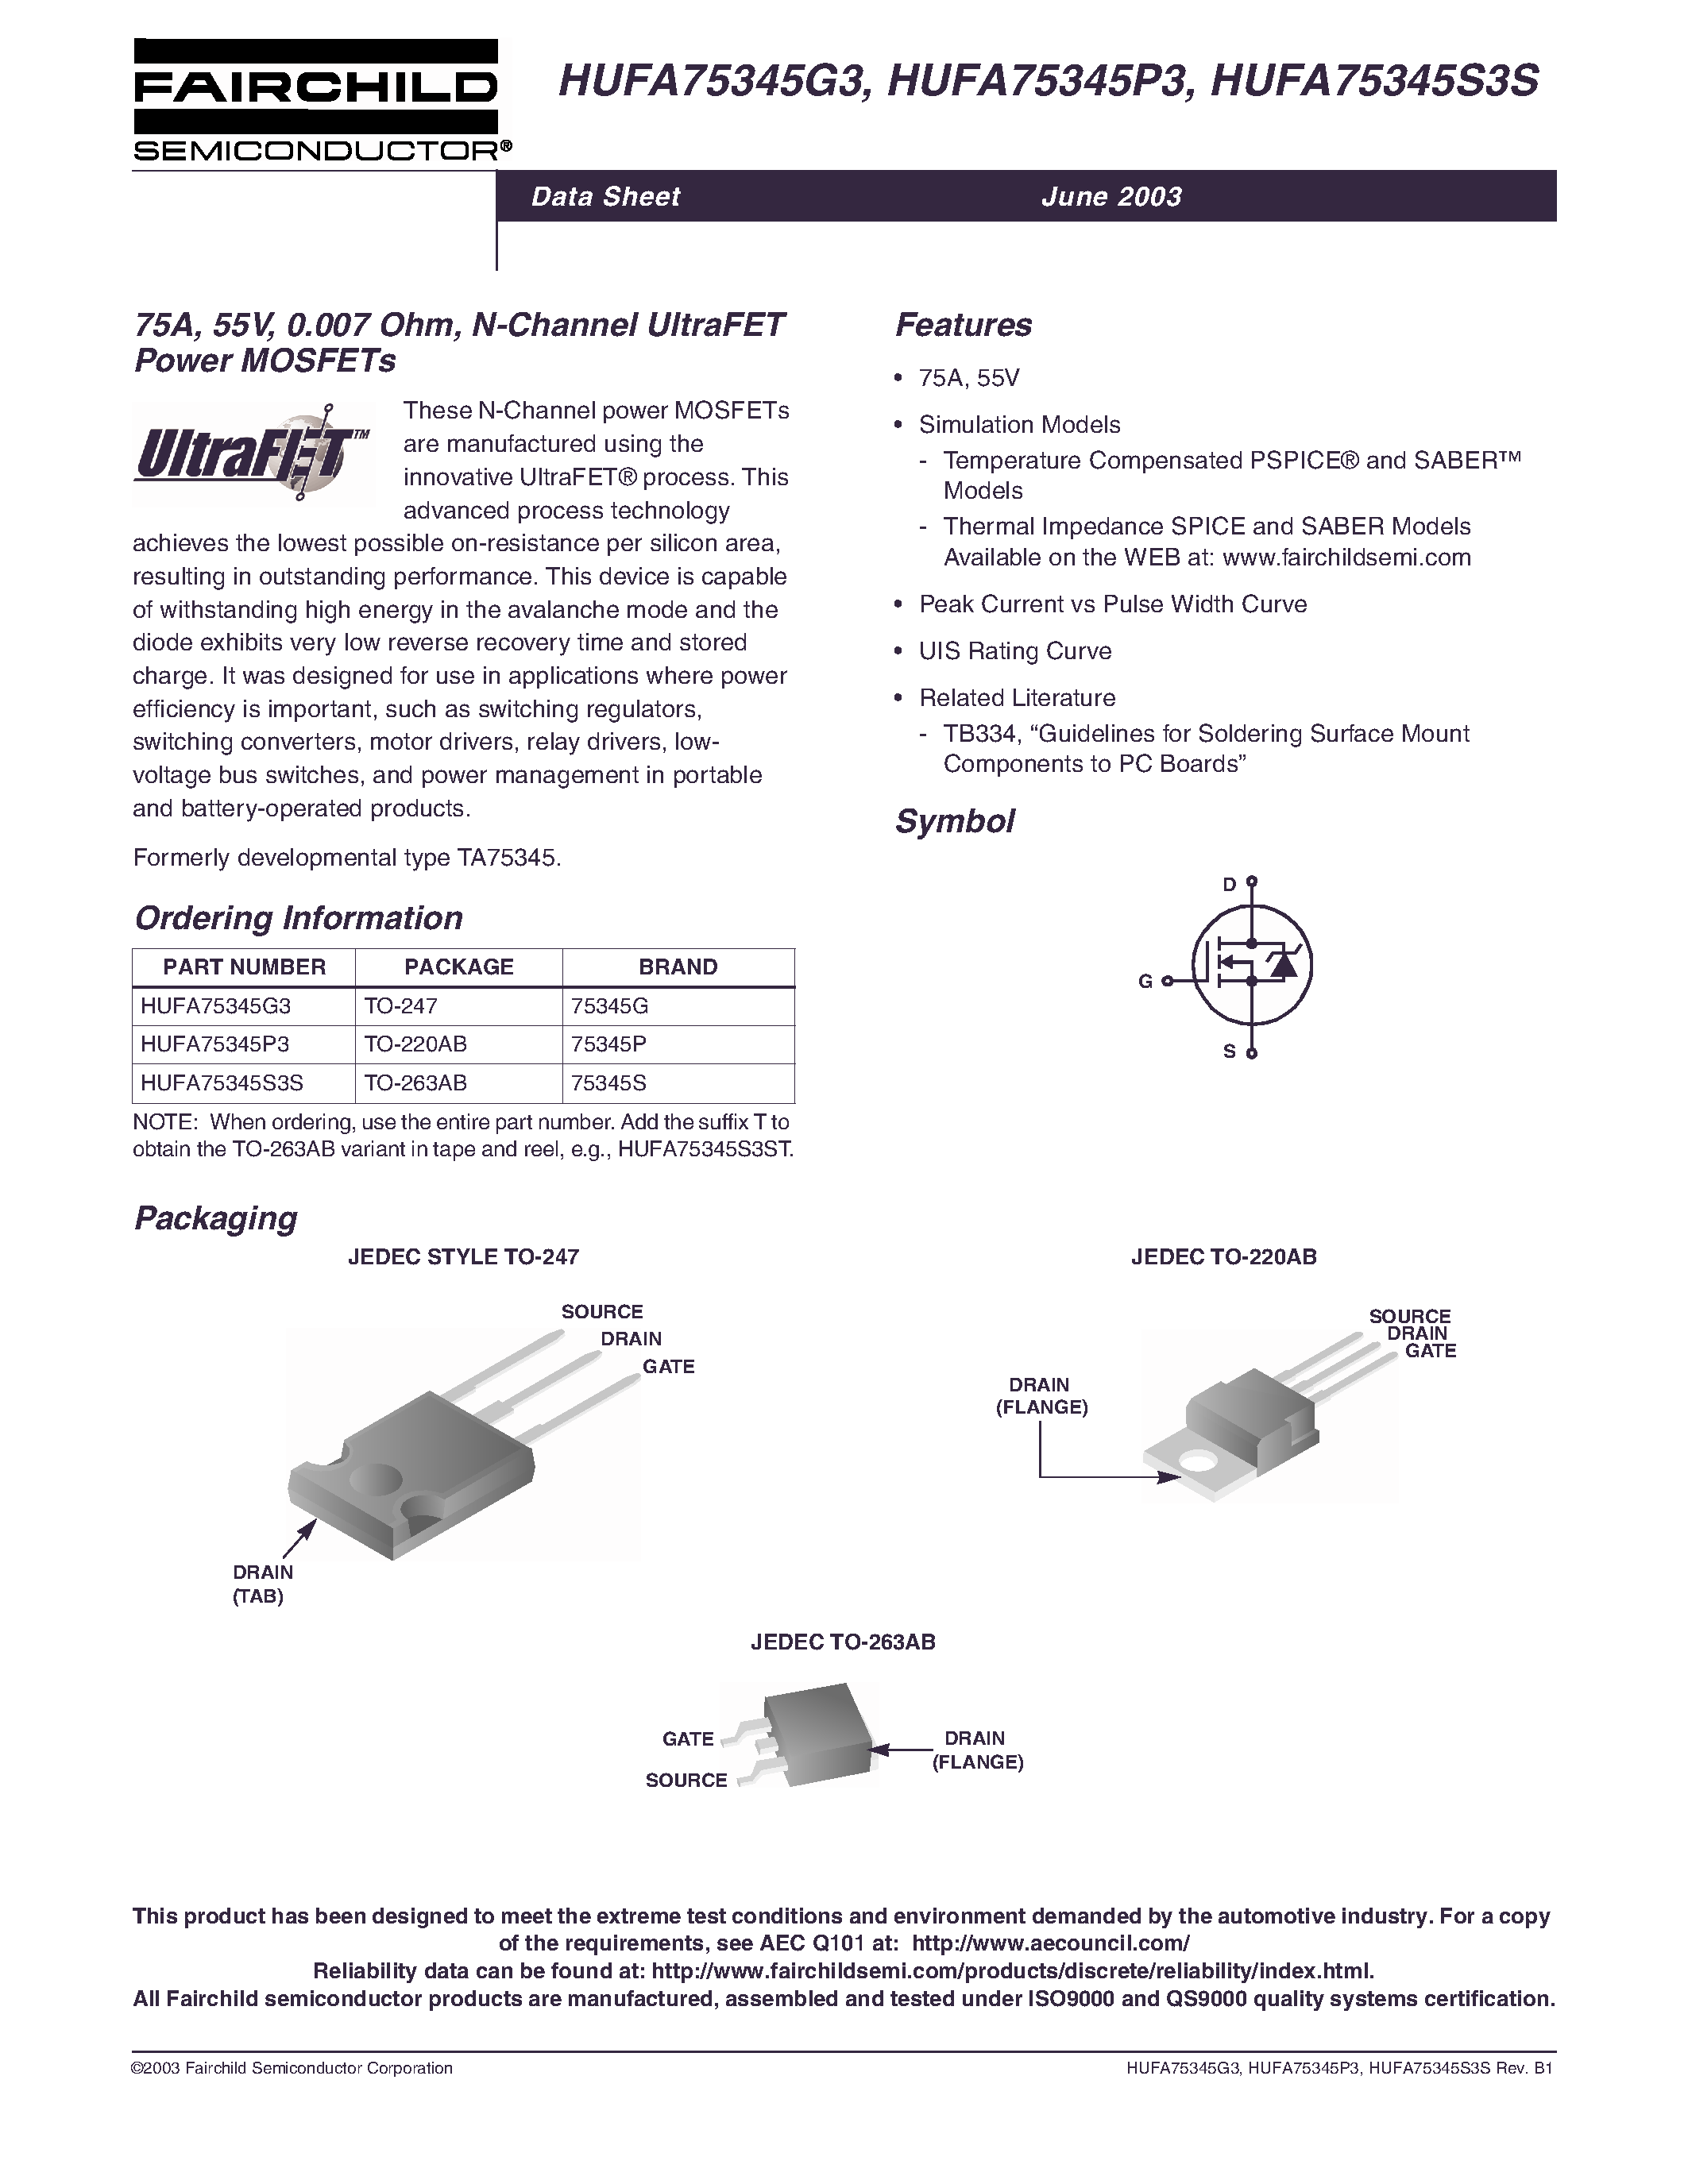 Даташит HUFA75345P3 - 75A/ 55V/ 0.007 Ohm/ N-Channel UltraFET Power MOSFETs страница 1